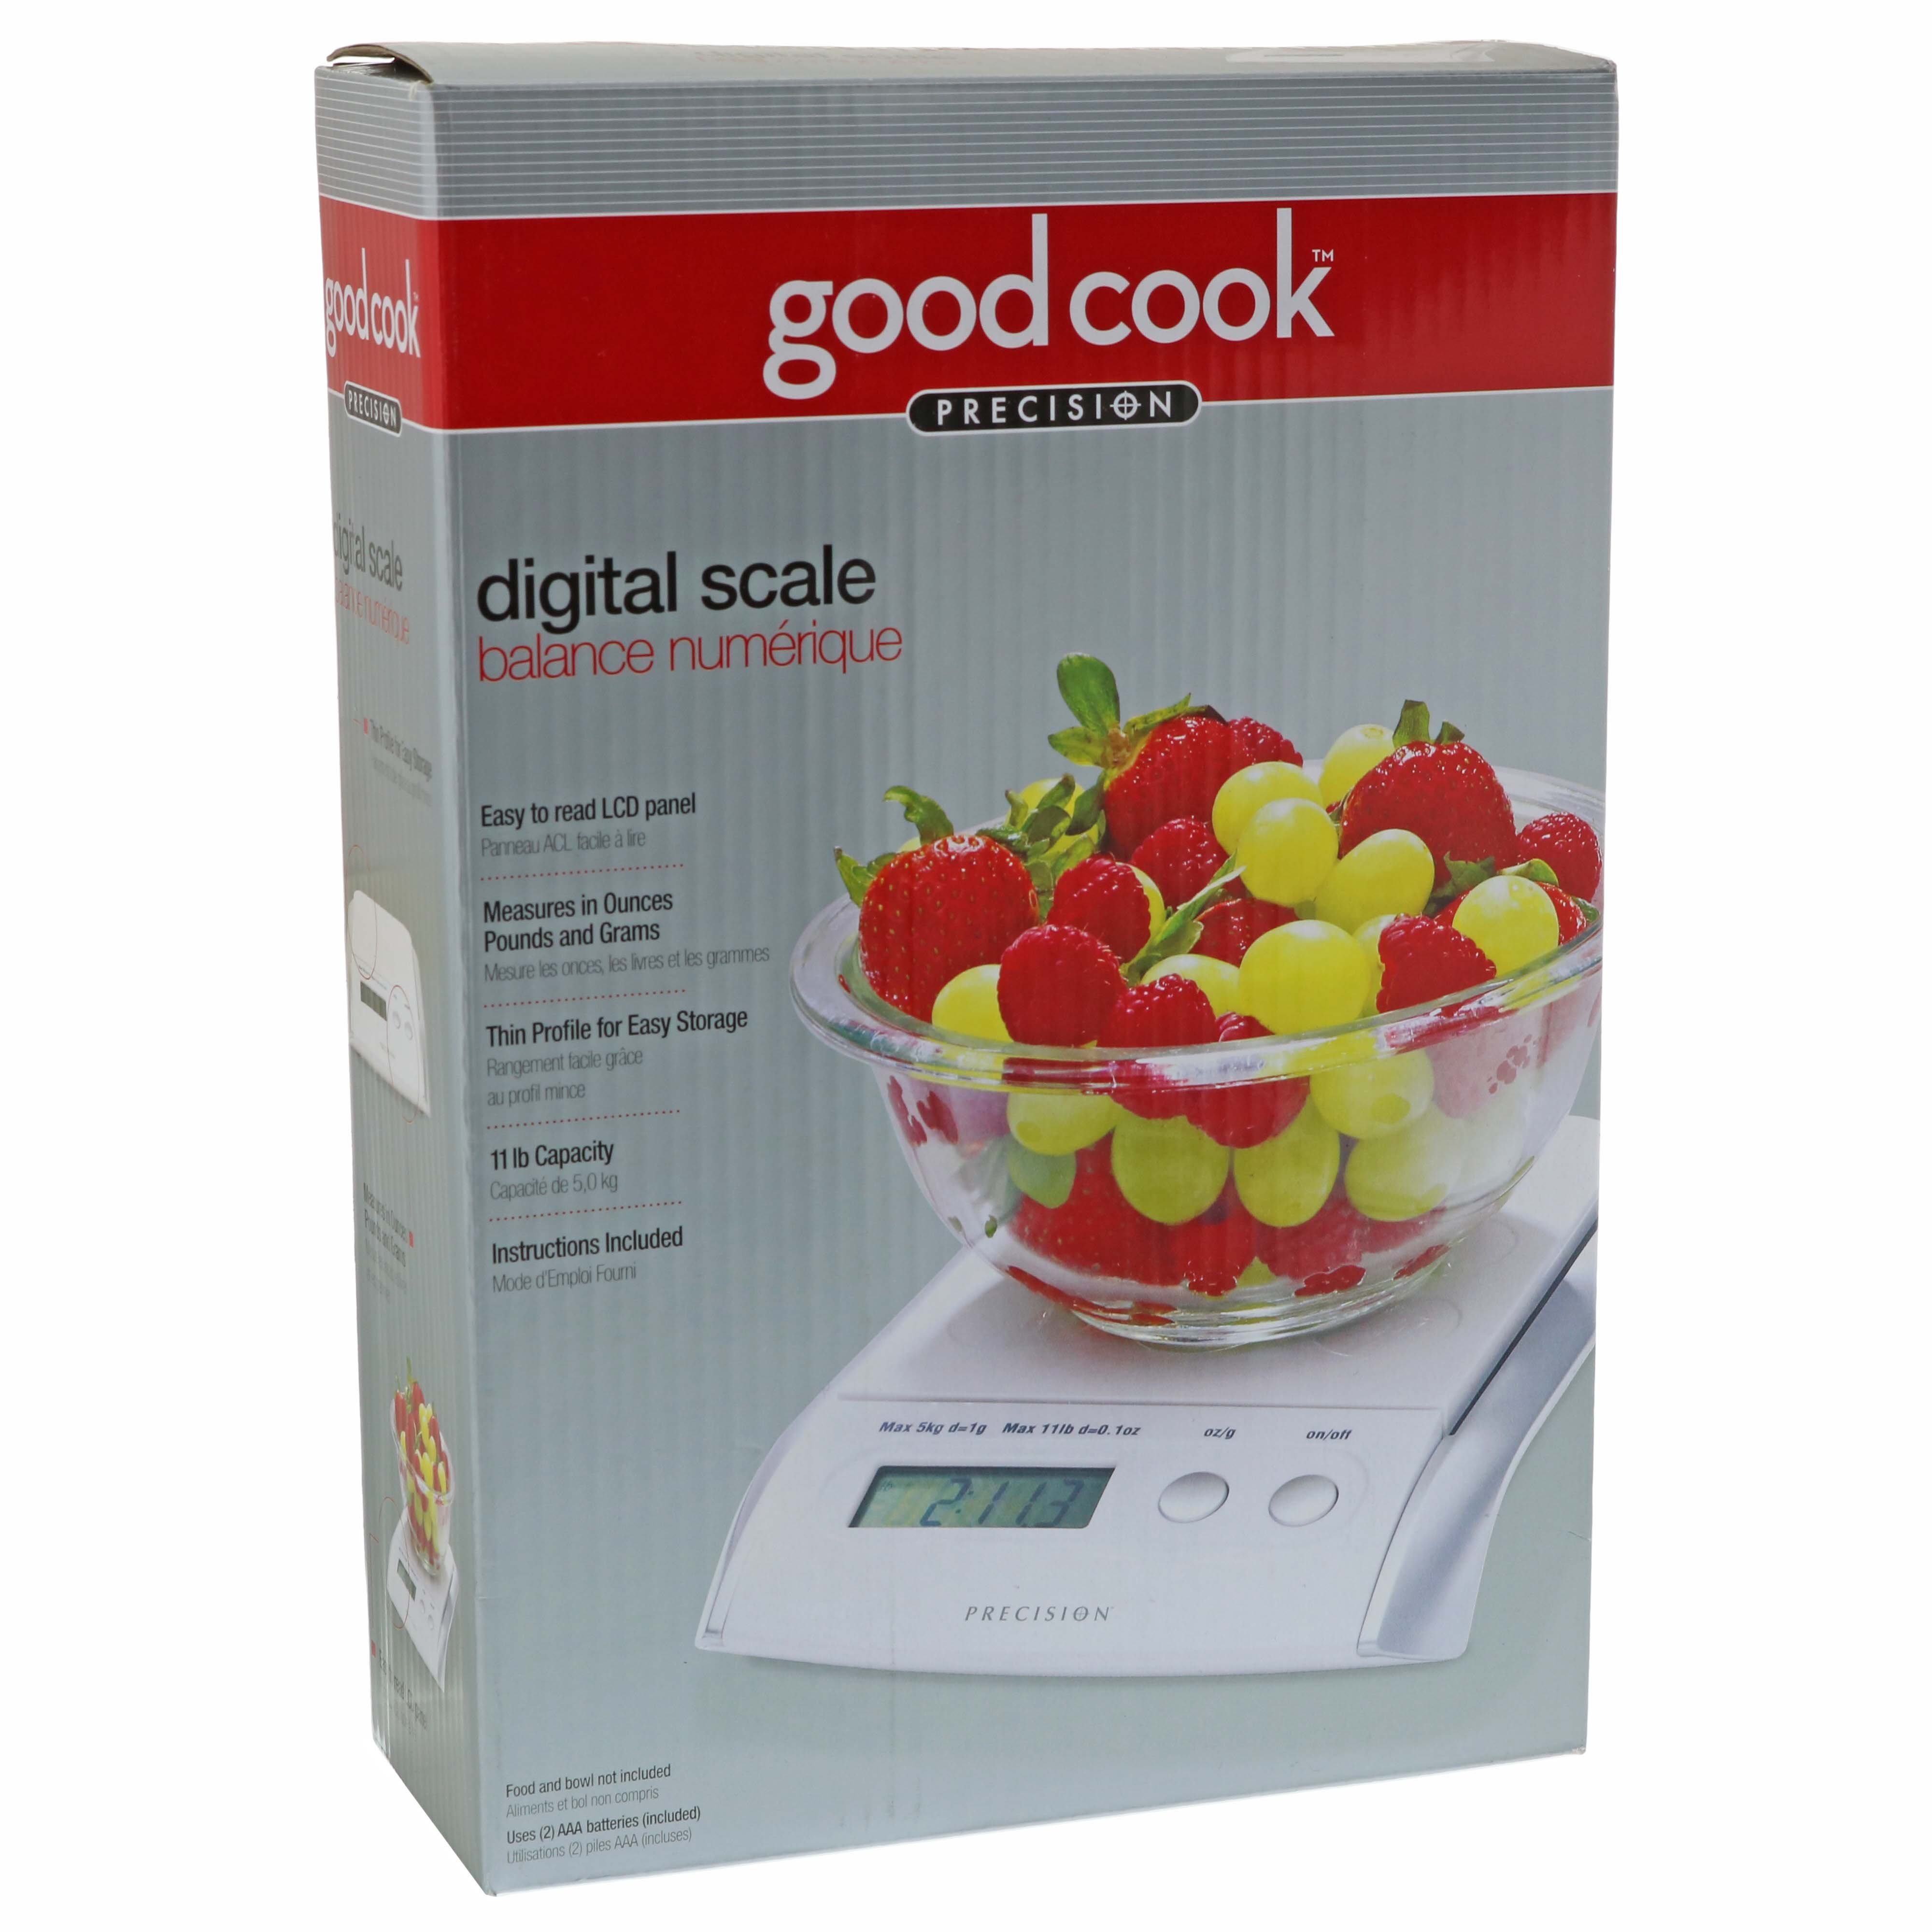 Good Cook Precision Digital Scale - Shop Kitchen & Dining at H-E-B